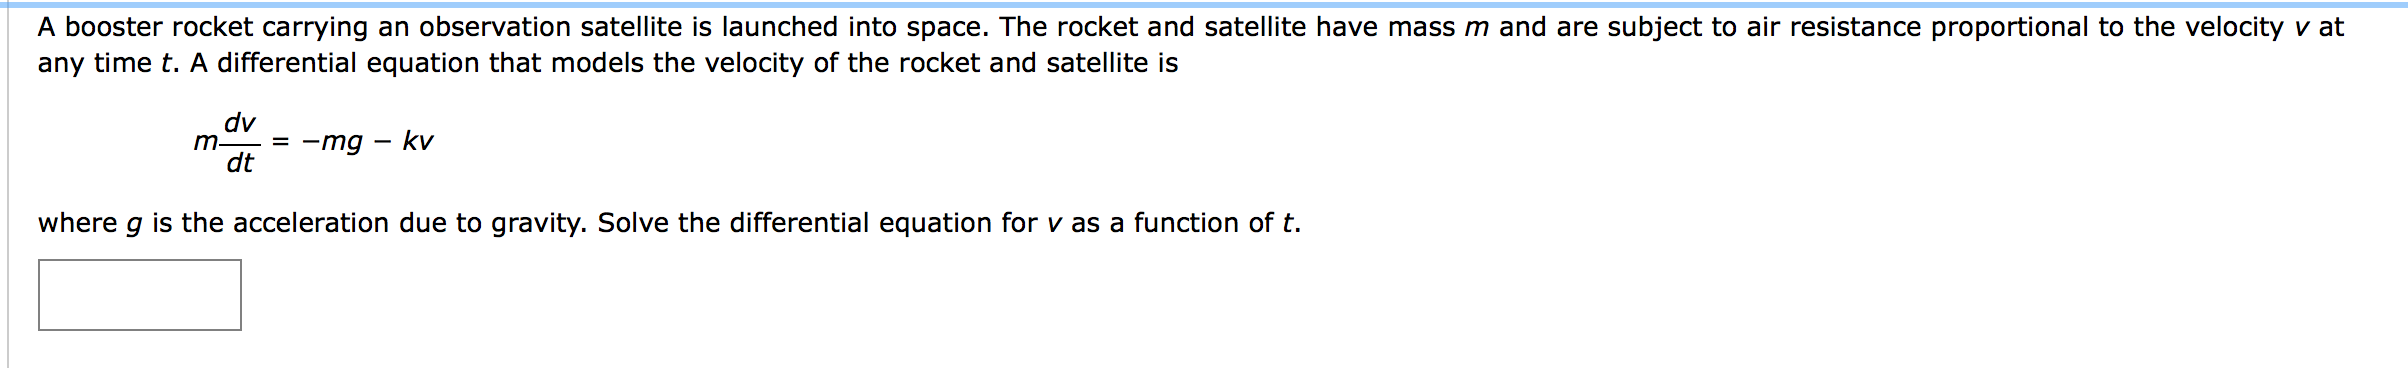 A booster rocket carrying an observation satellite is launched into space. The rocket and satellite have mass m and are subject to air resistance proportional to the velocity v at
any time t. A differential equation that models the velocity of the rocket and satellite is
dv
m-
= -mg – kv
dt
where g is the acceleration due to gravity. Solve the differential equation for v as a function of t.
